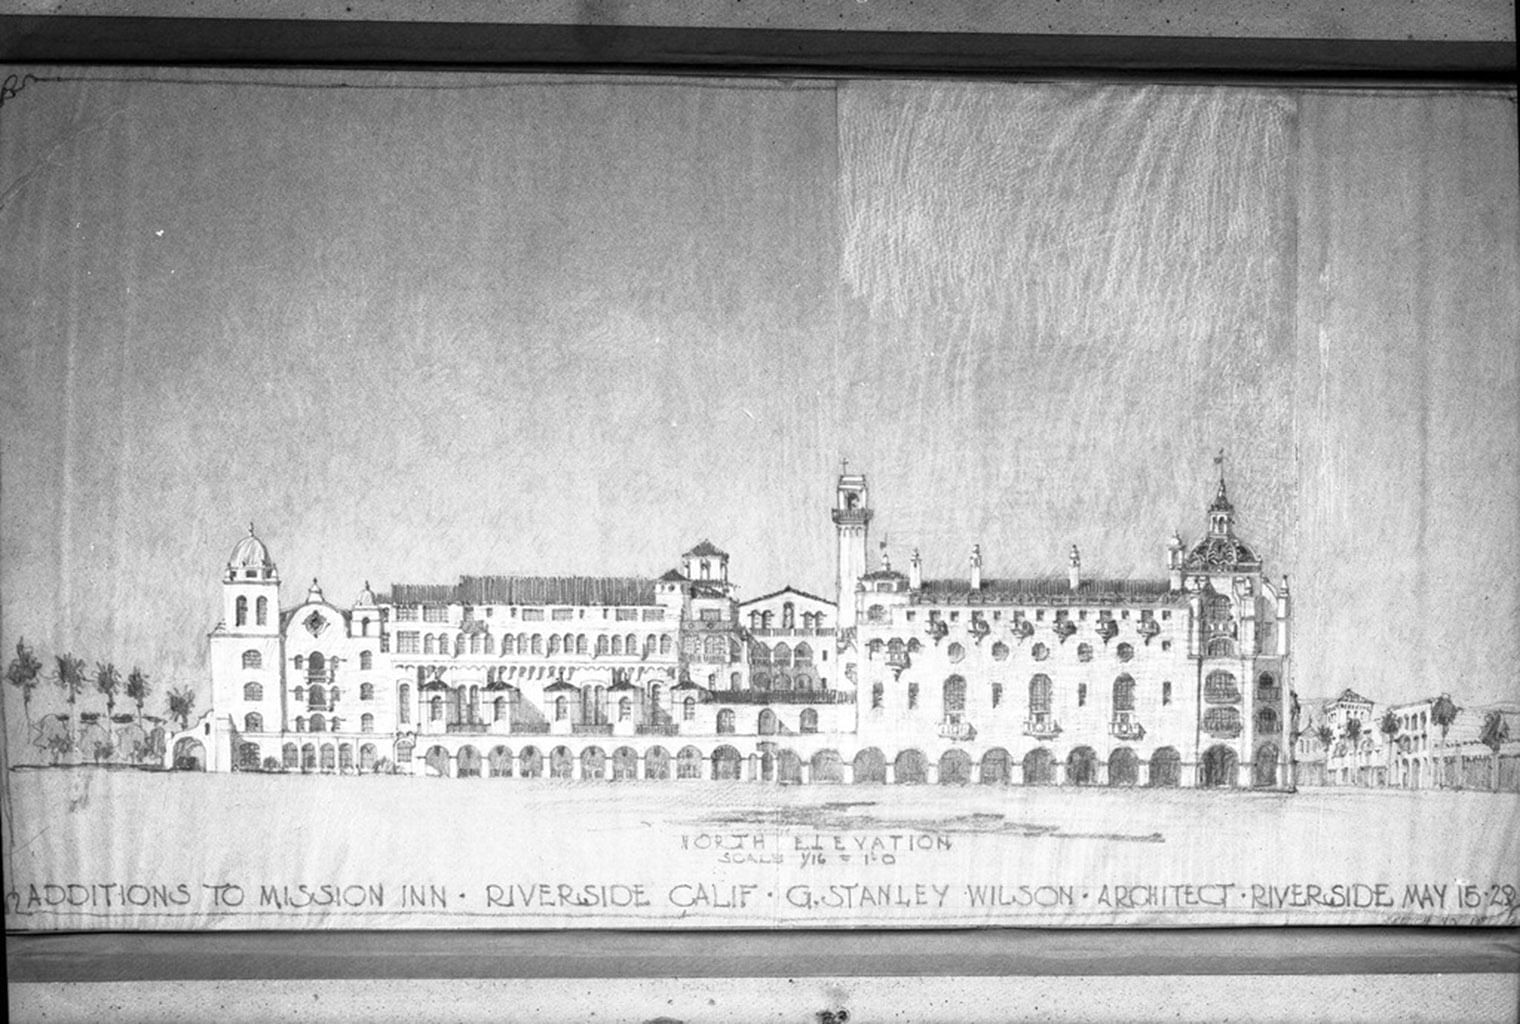 Vintage image of painting of the hotel at Mission Inn Riverside